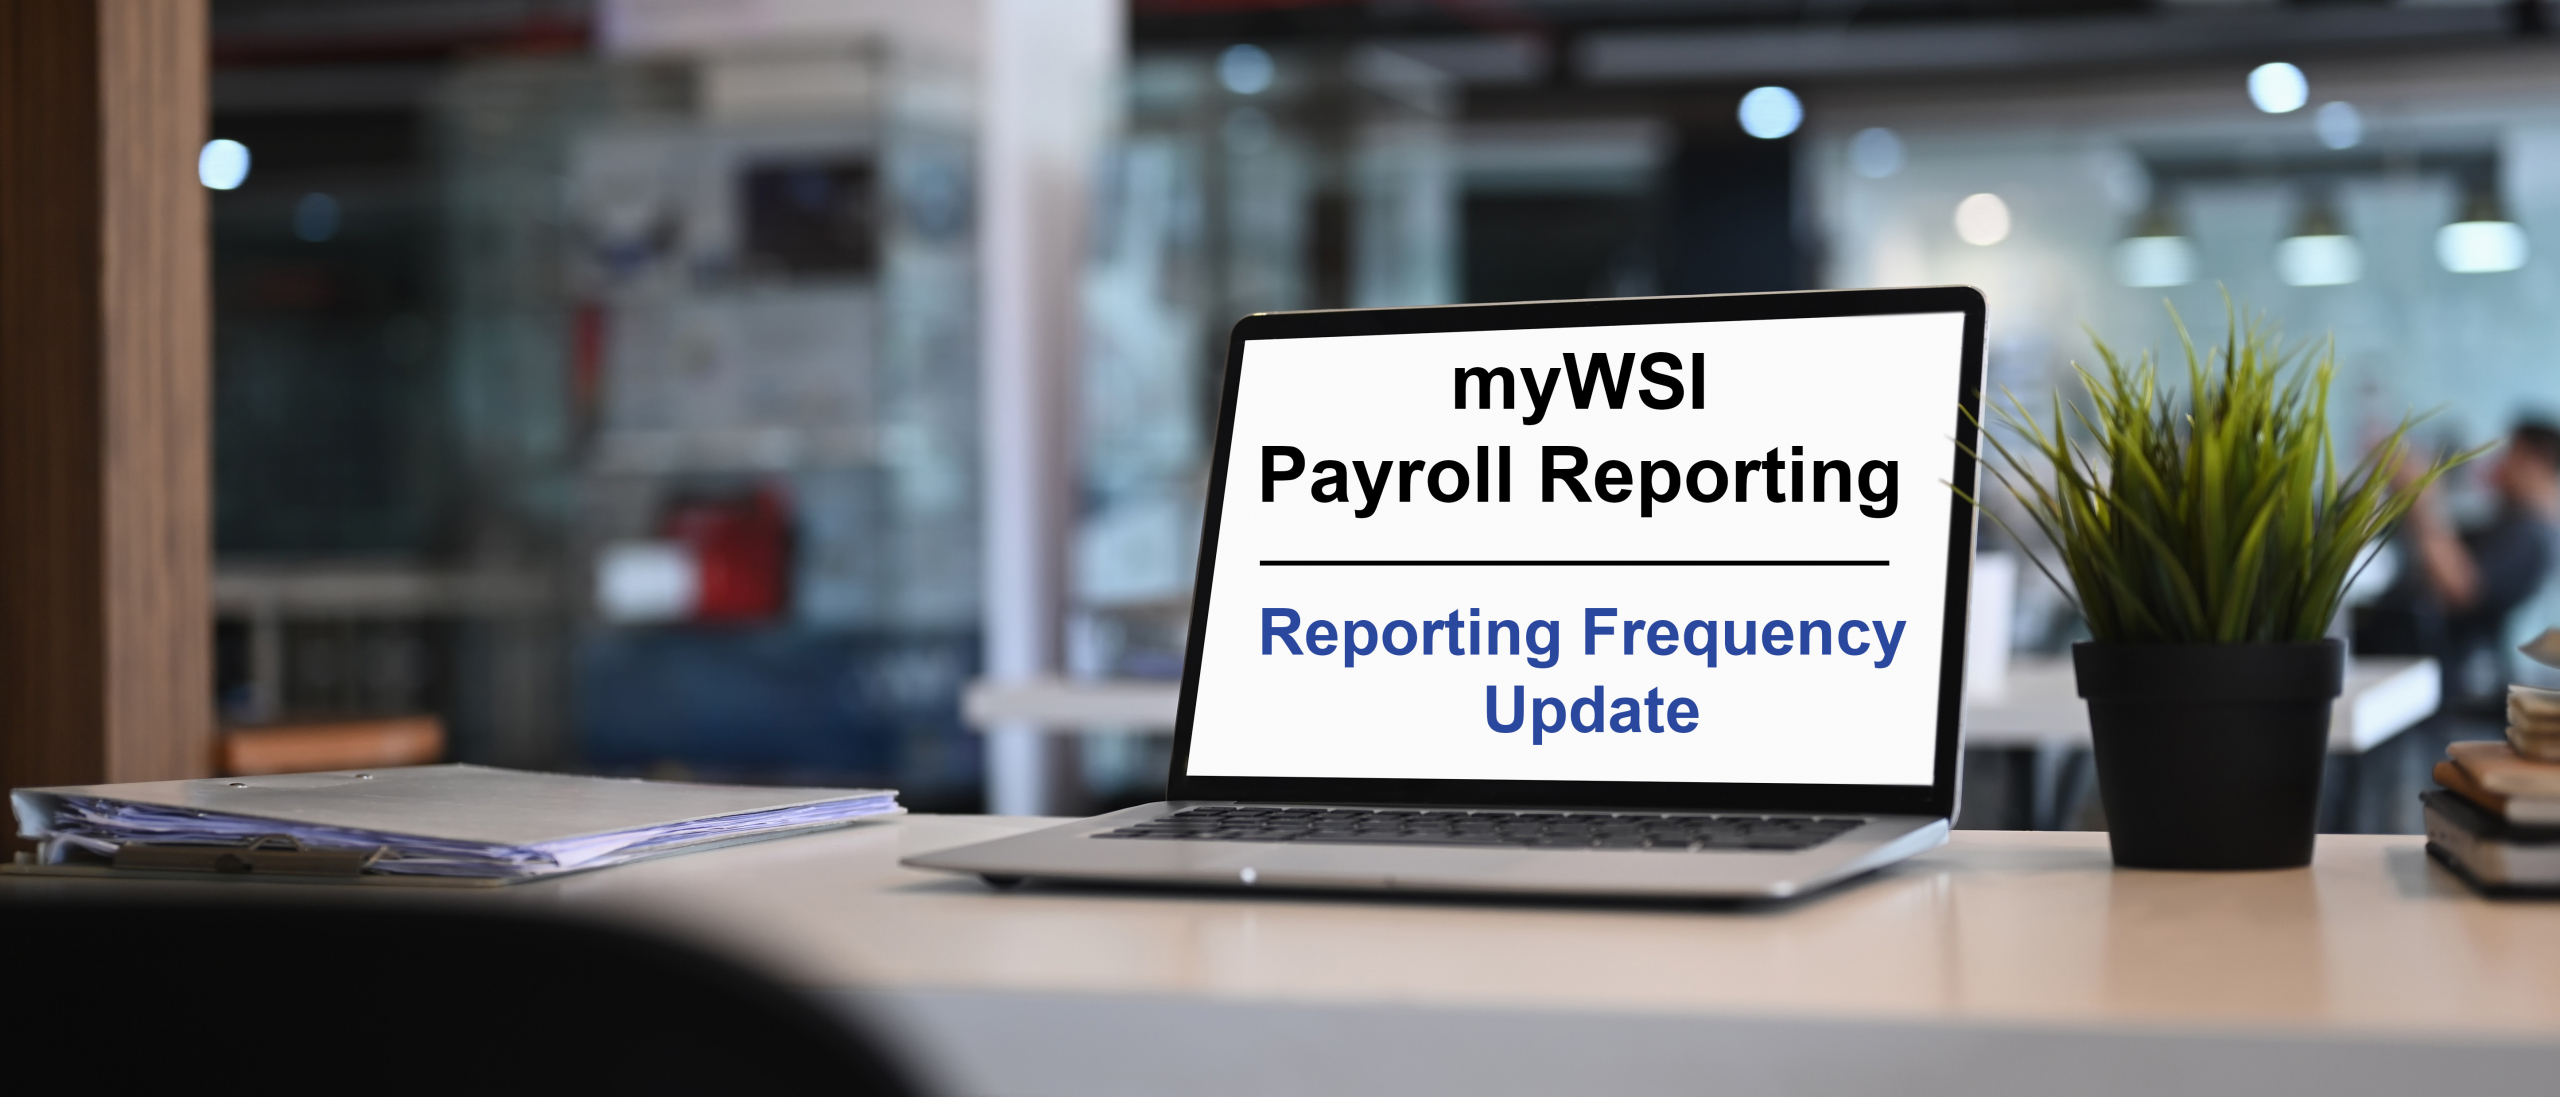 Laptop computer in softly lit office displaying the text "myWSI Payroll Reporting - Reporting Frequency Update